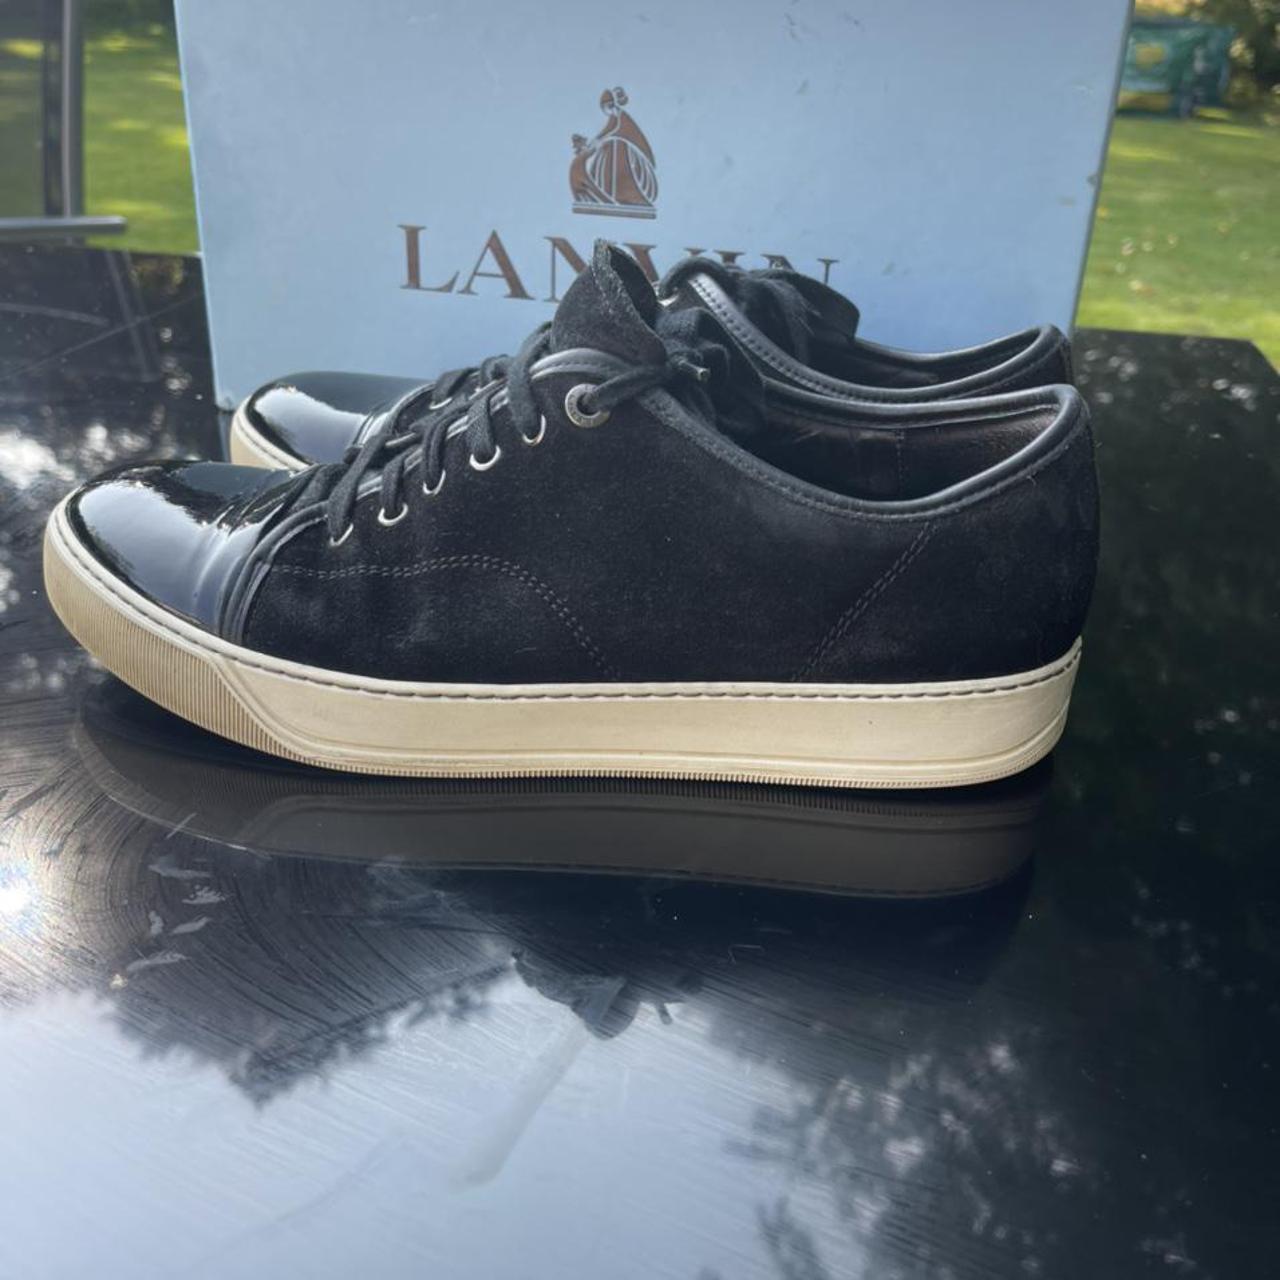 Product Image 3 - Authentic Lanvin classic sneaker RRP